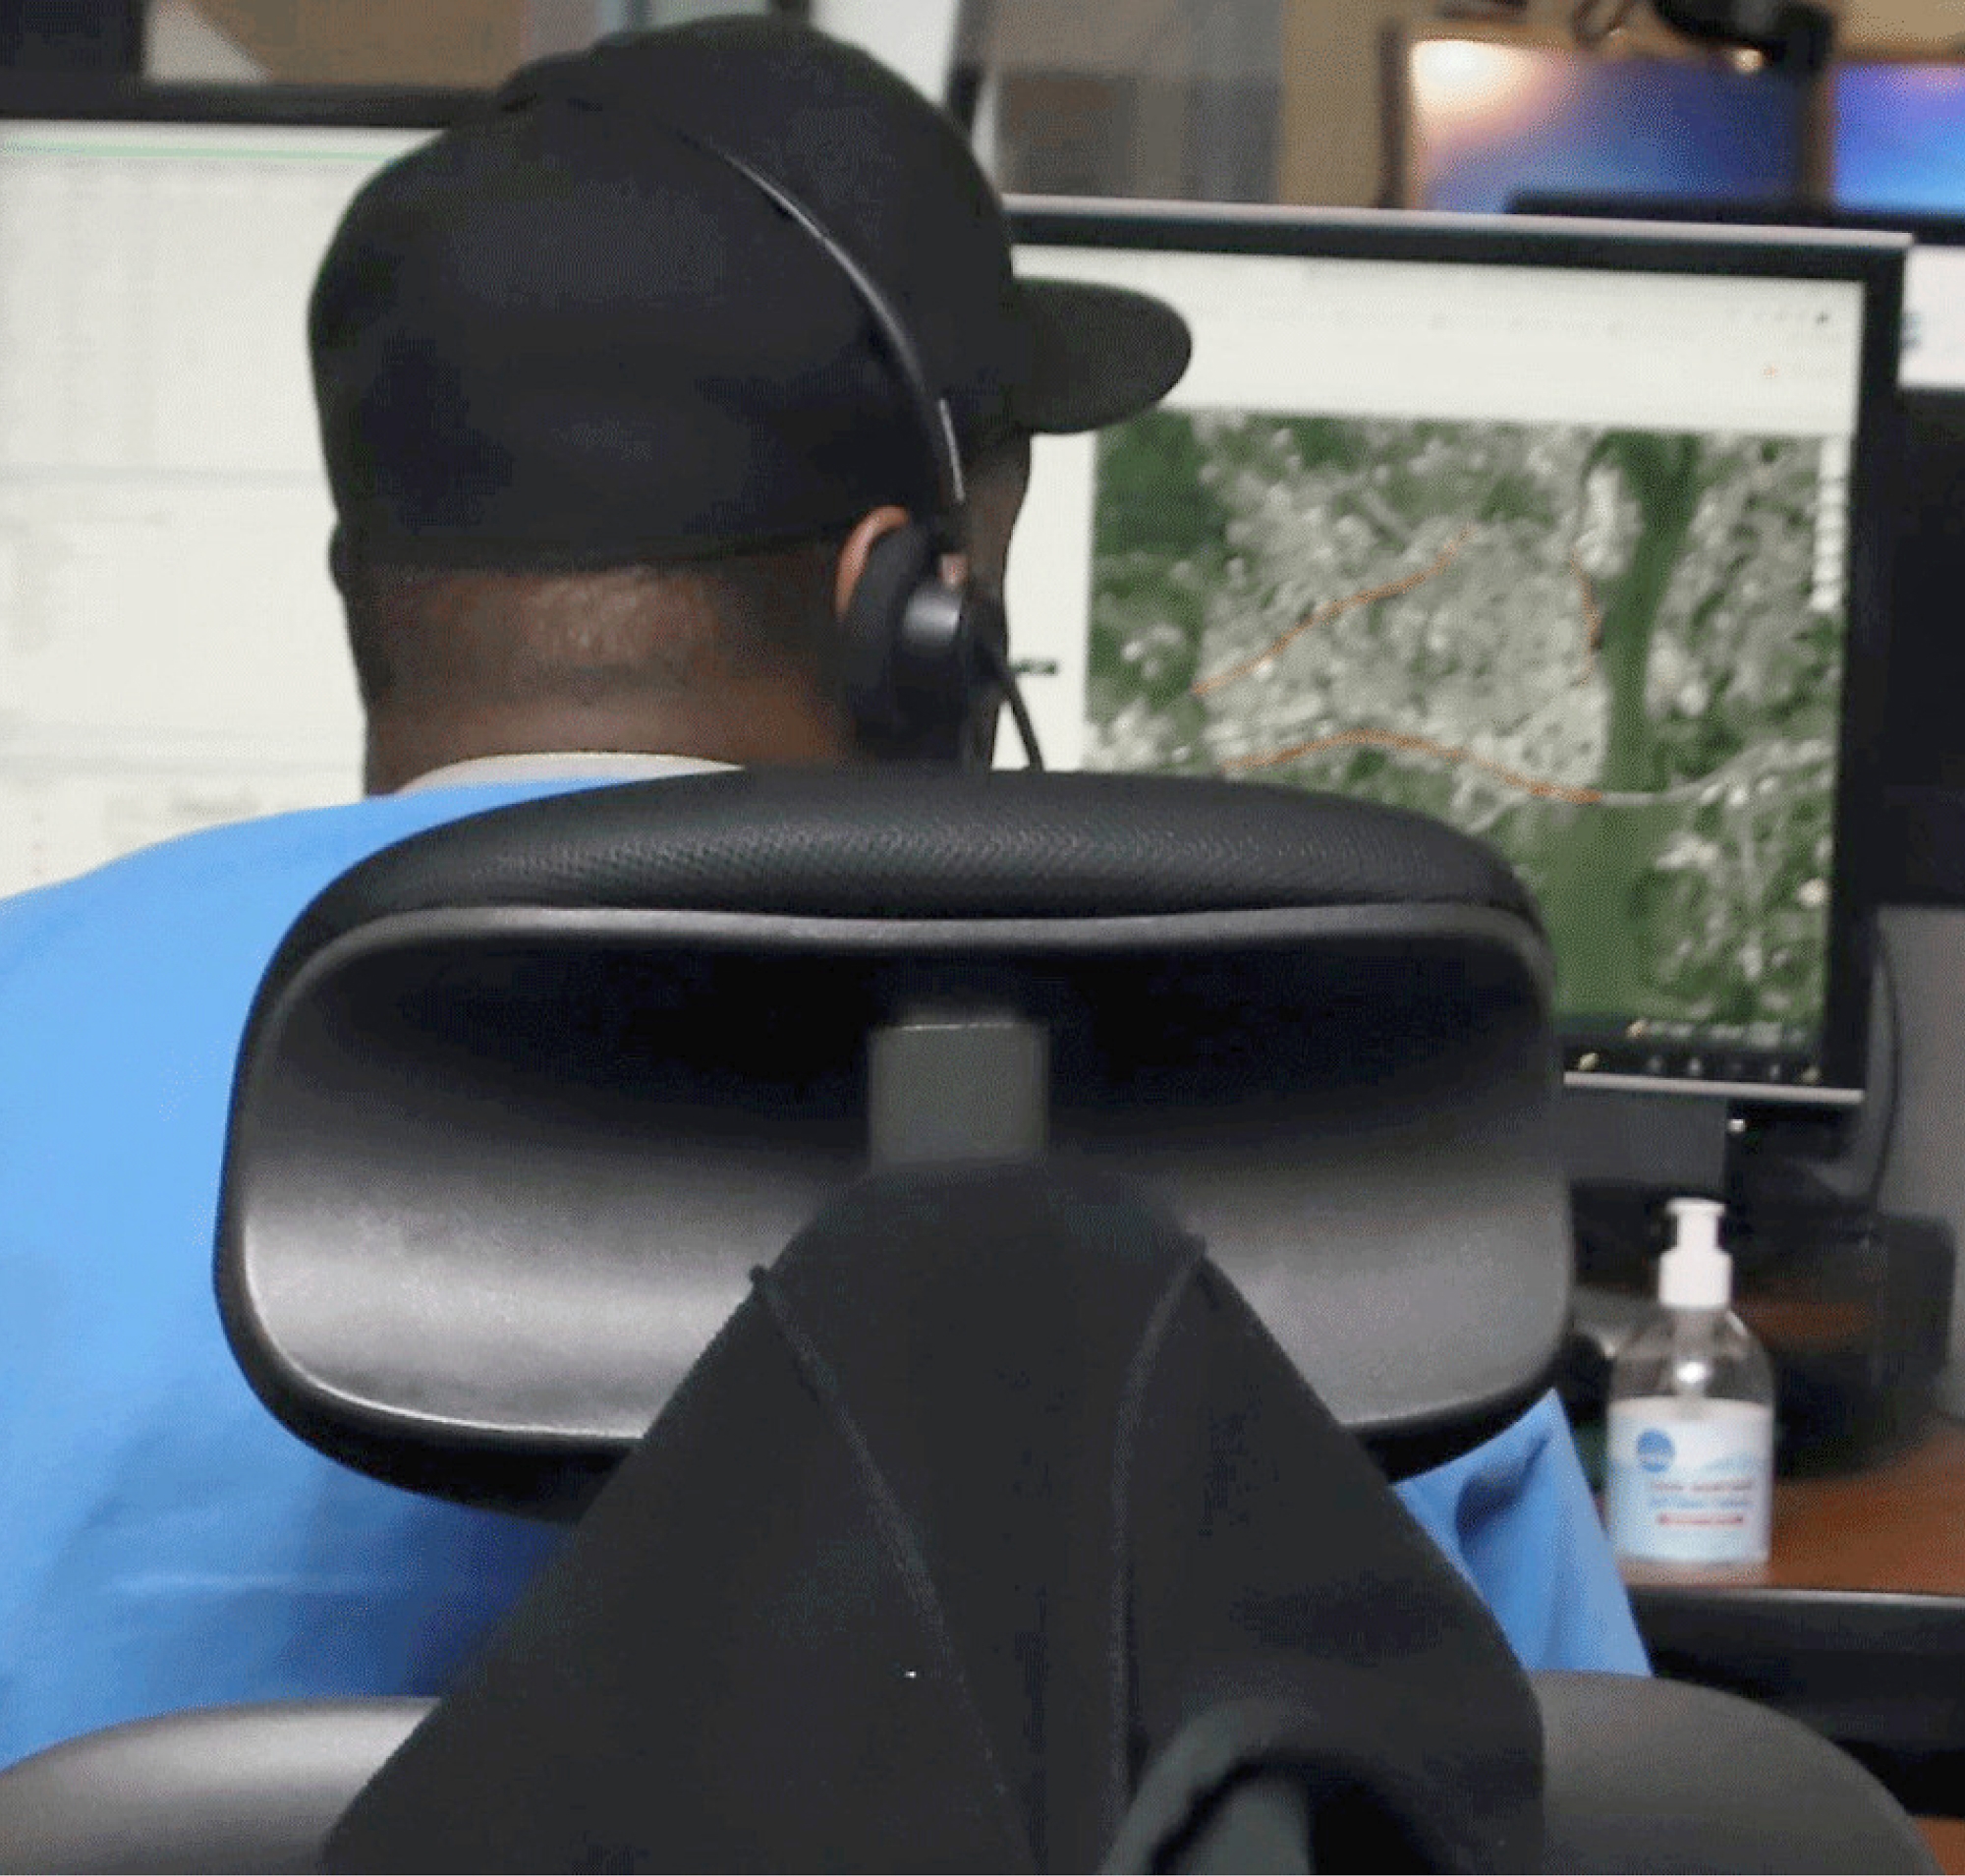 Man in orange shirt and black cap sitting at a desk, wearing headphones and looking at multiple computer screens.